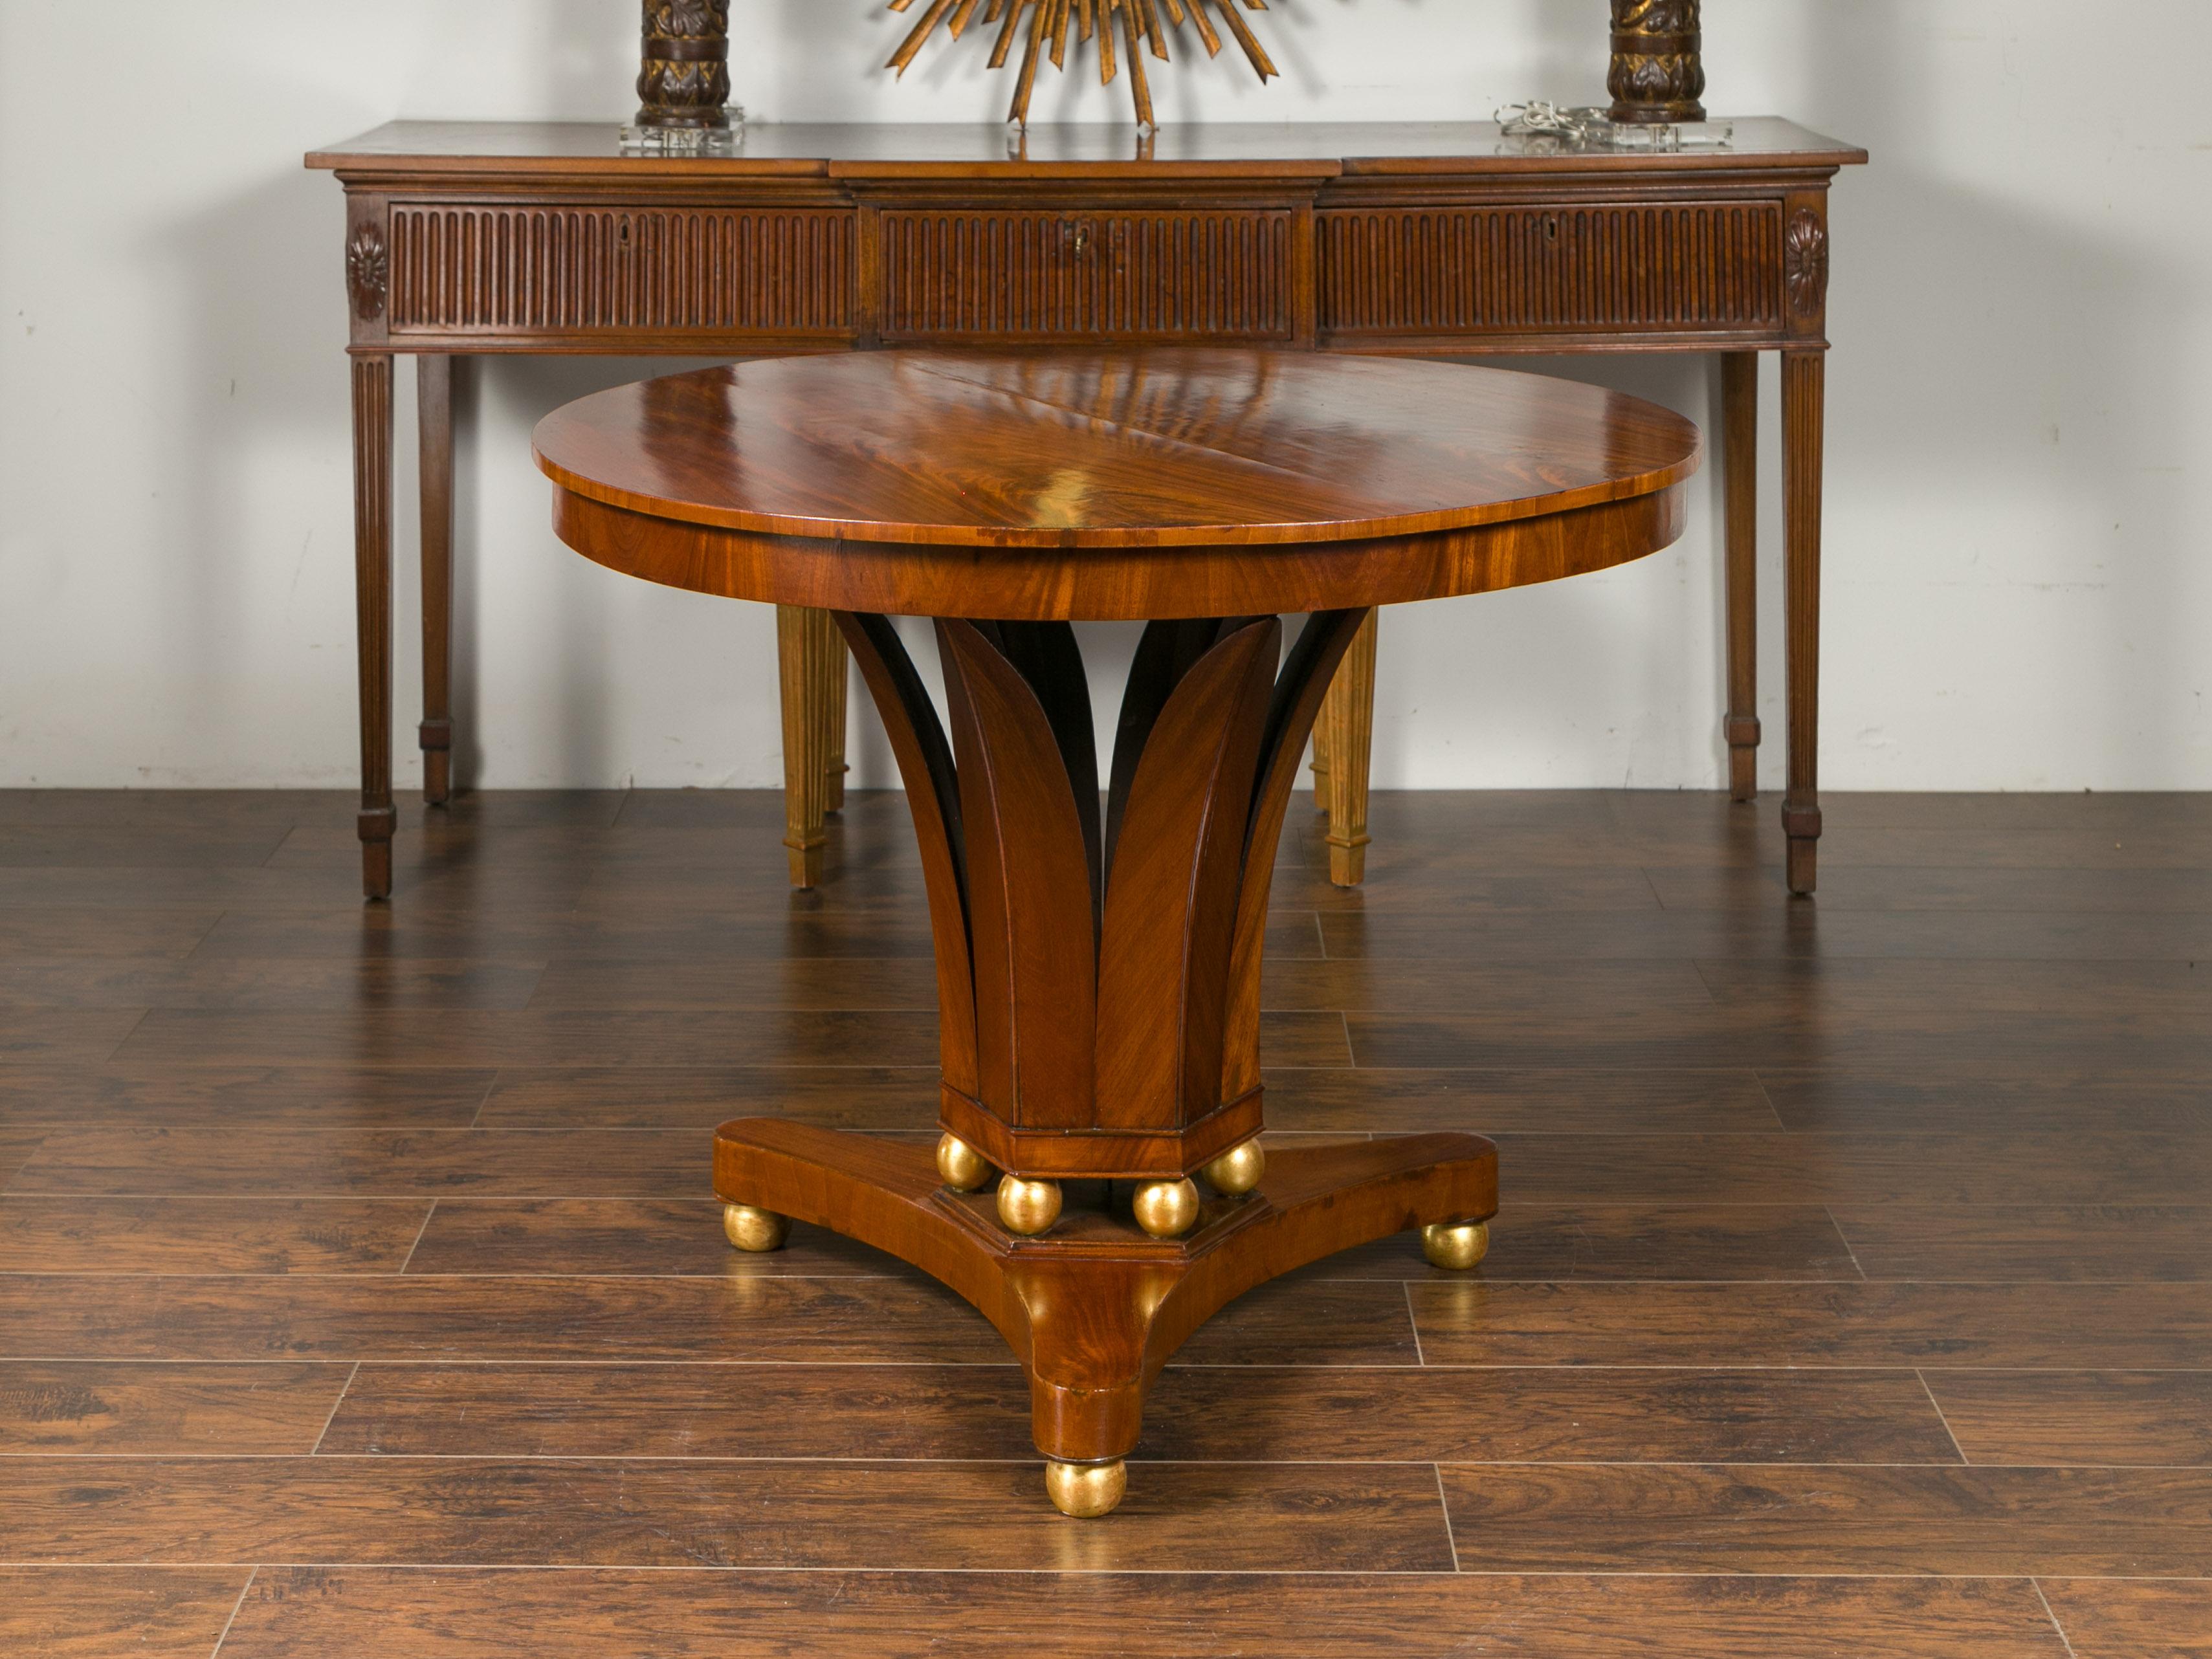 An Austrian Biedermeier period walnut center table from the mid-19th century, with giltwood spheres and foliage style base. Born in Imperial Austria during the second quarter of the 19th century, this exquisite walnut table features a circular